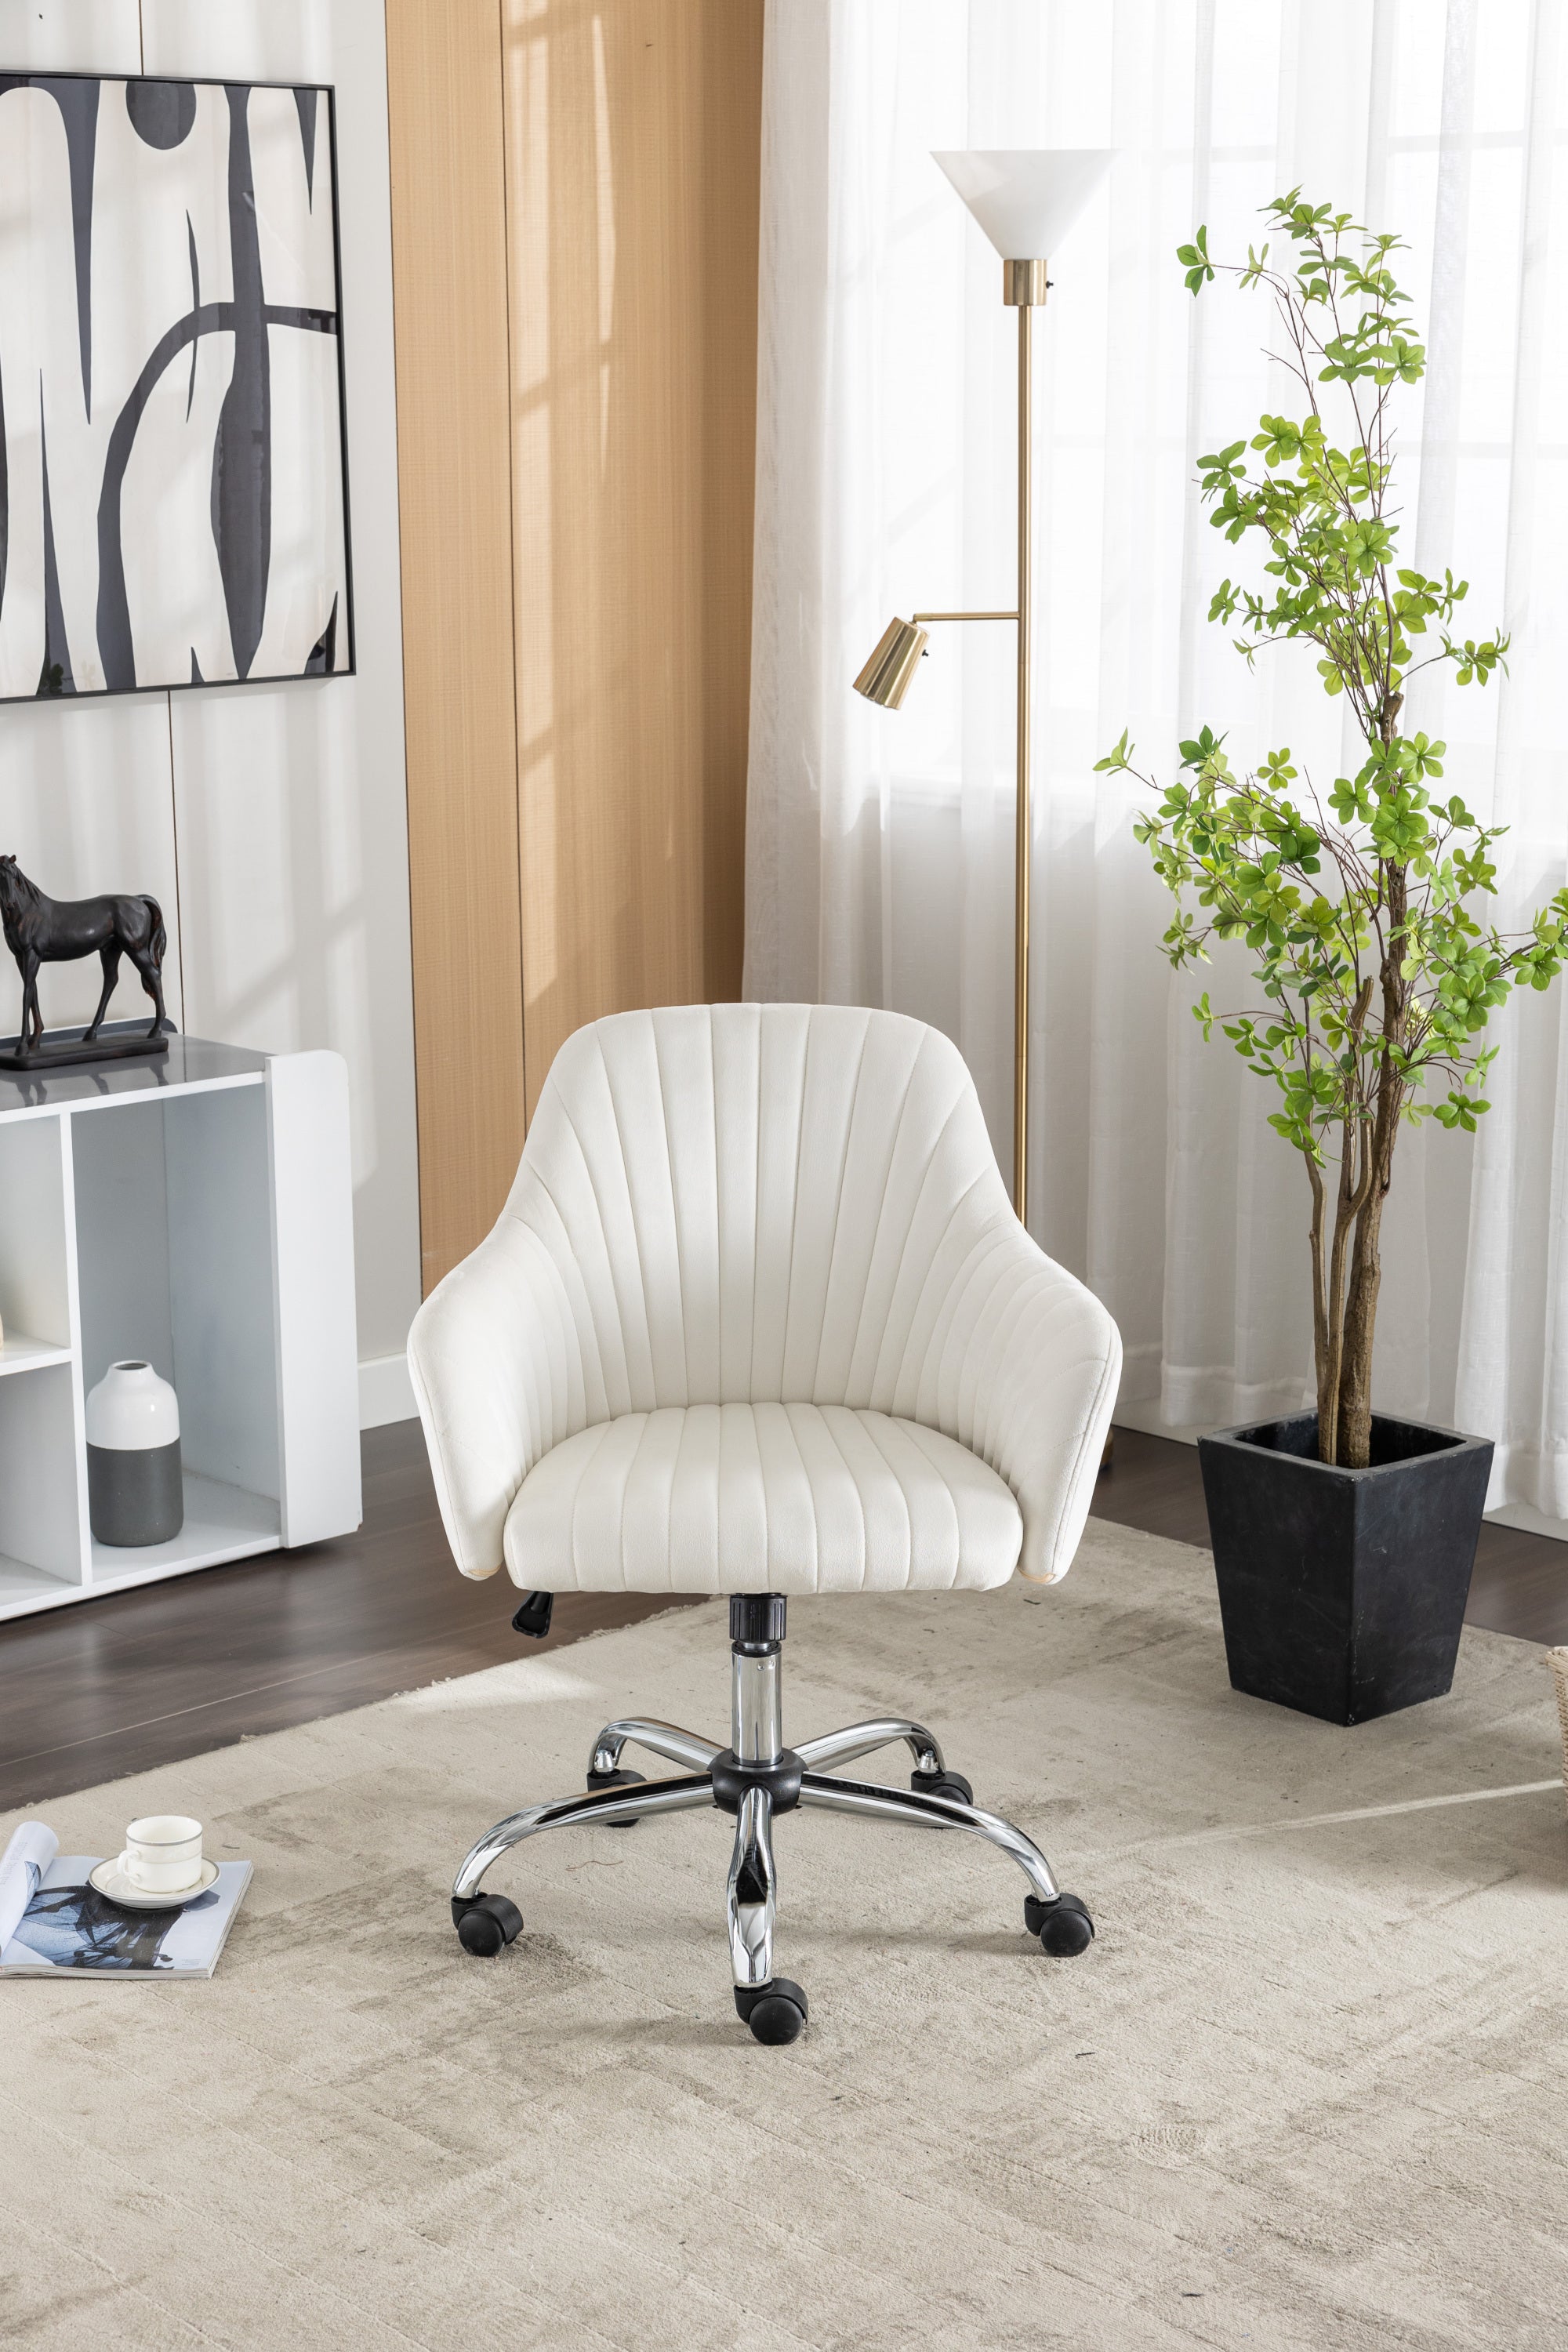 Modern Home Office Leisure Chair with Adjustable Velvet Height - Beige